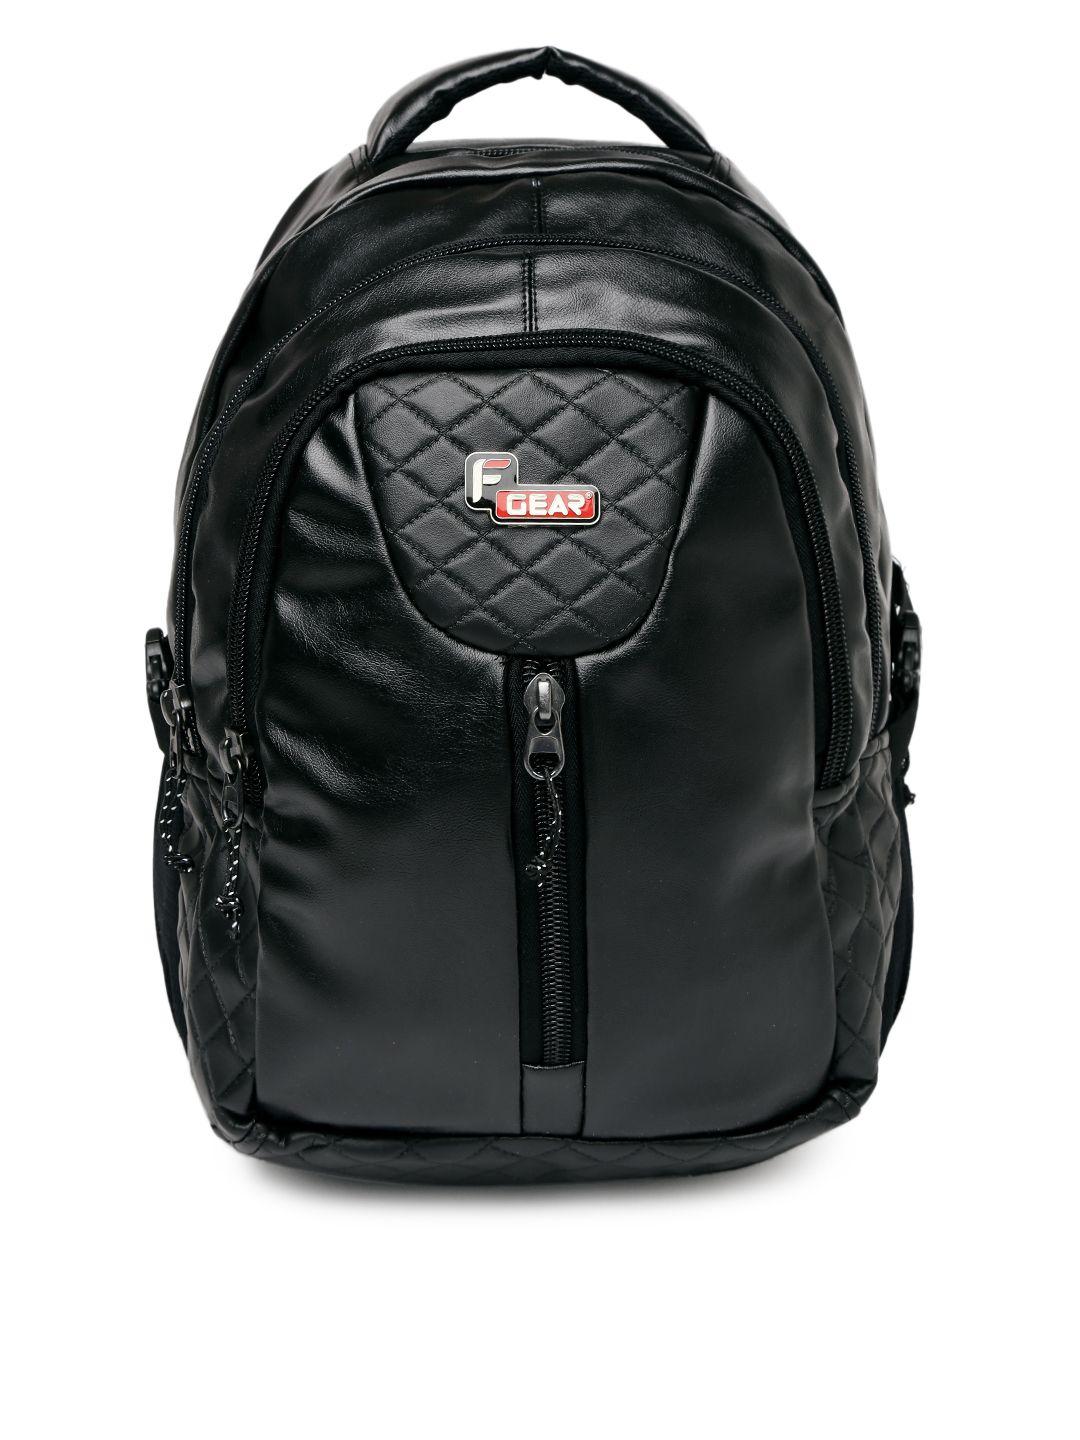 f gear unisex black solid tycoon backpack